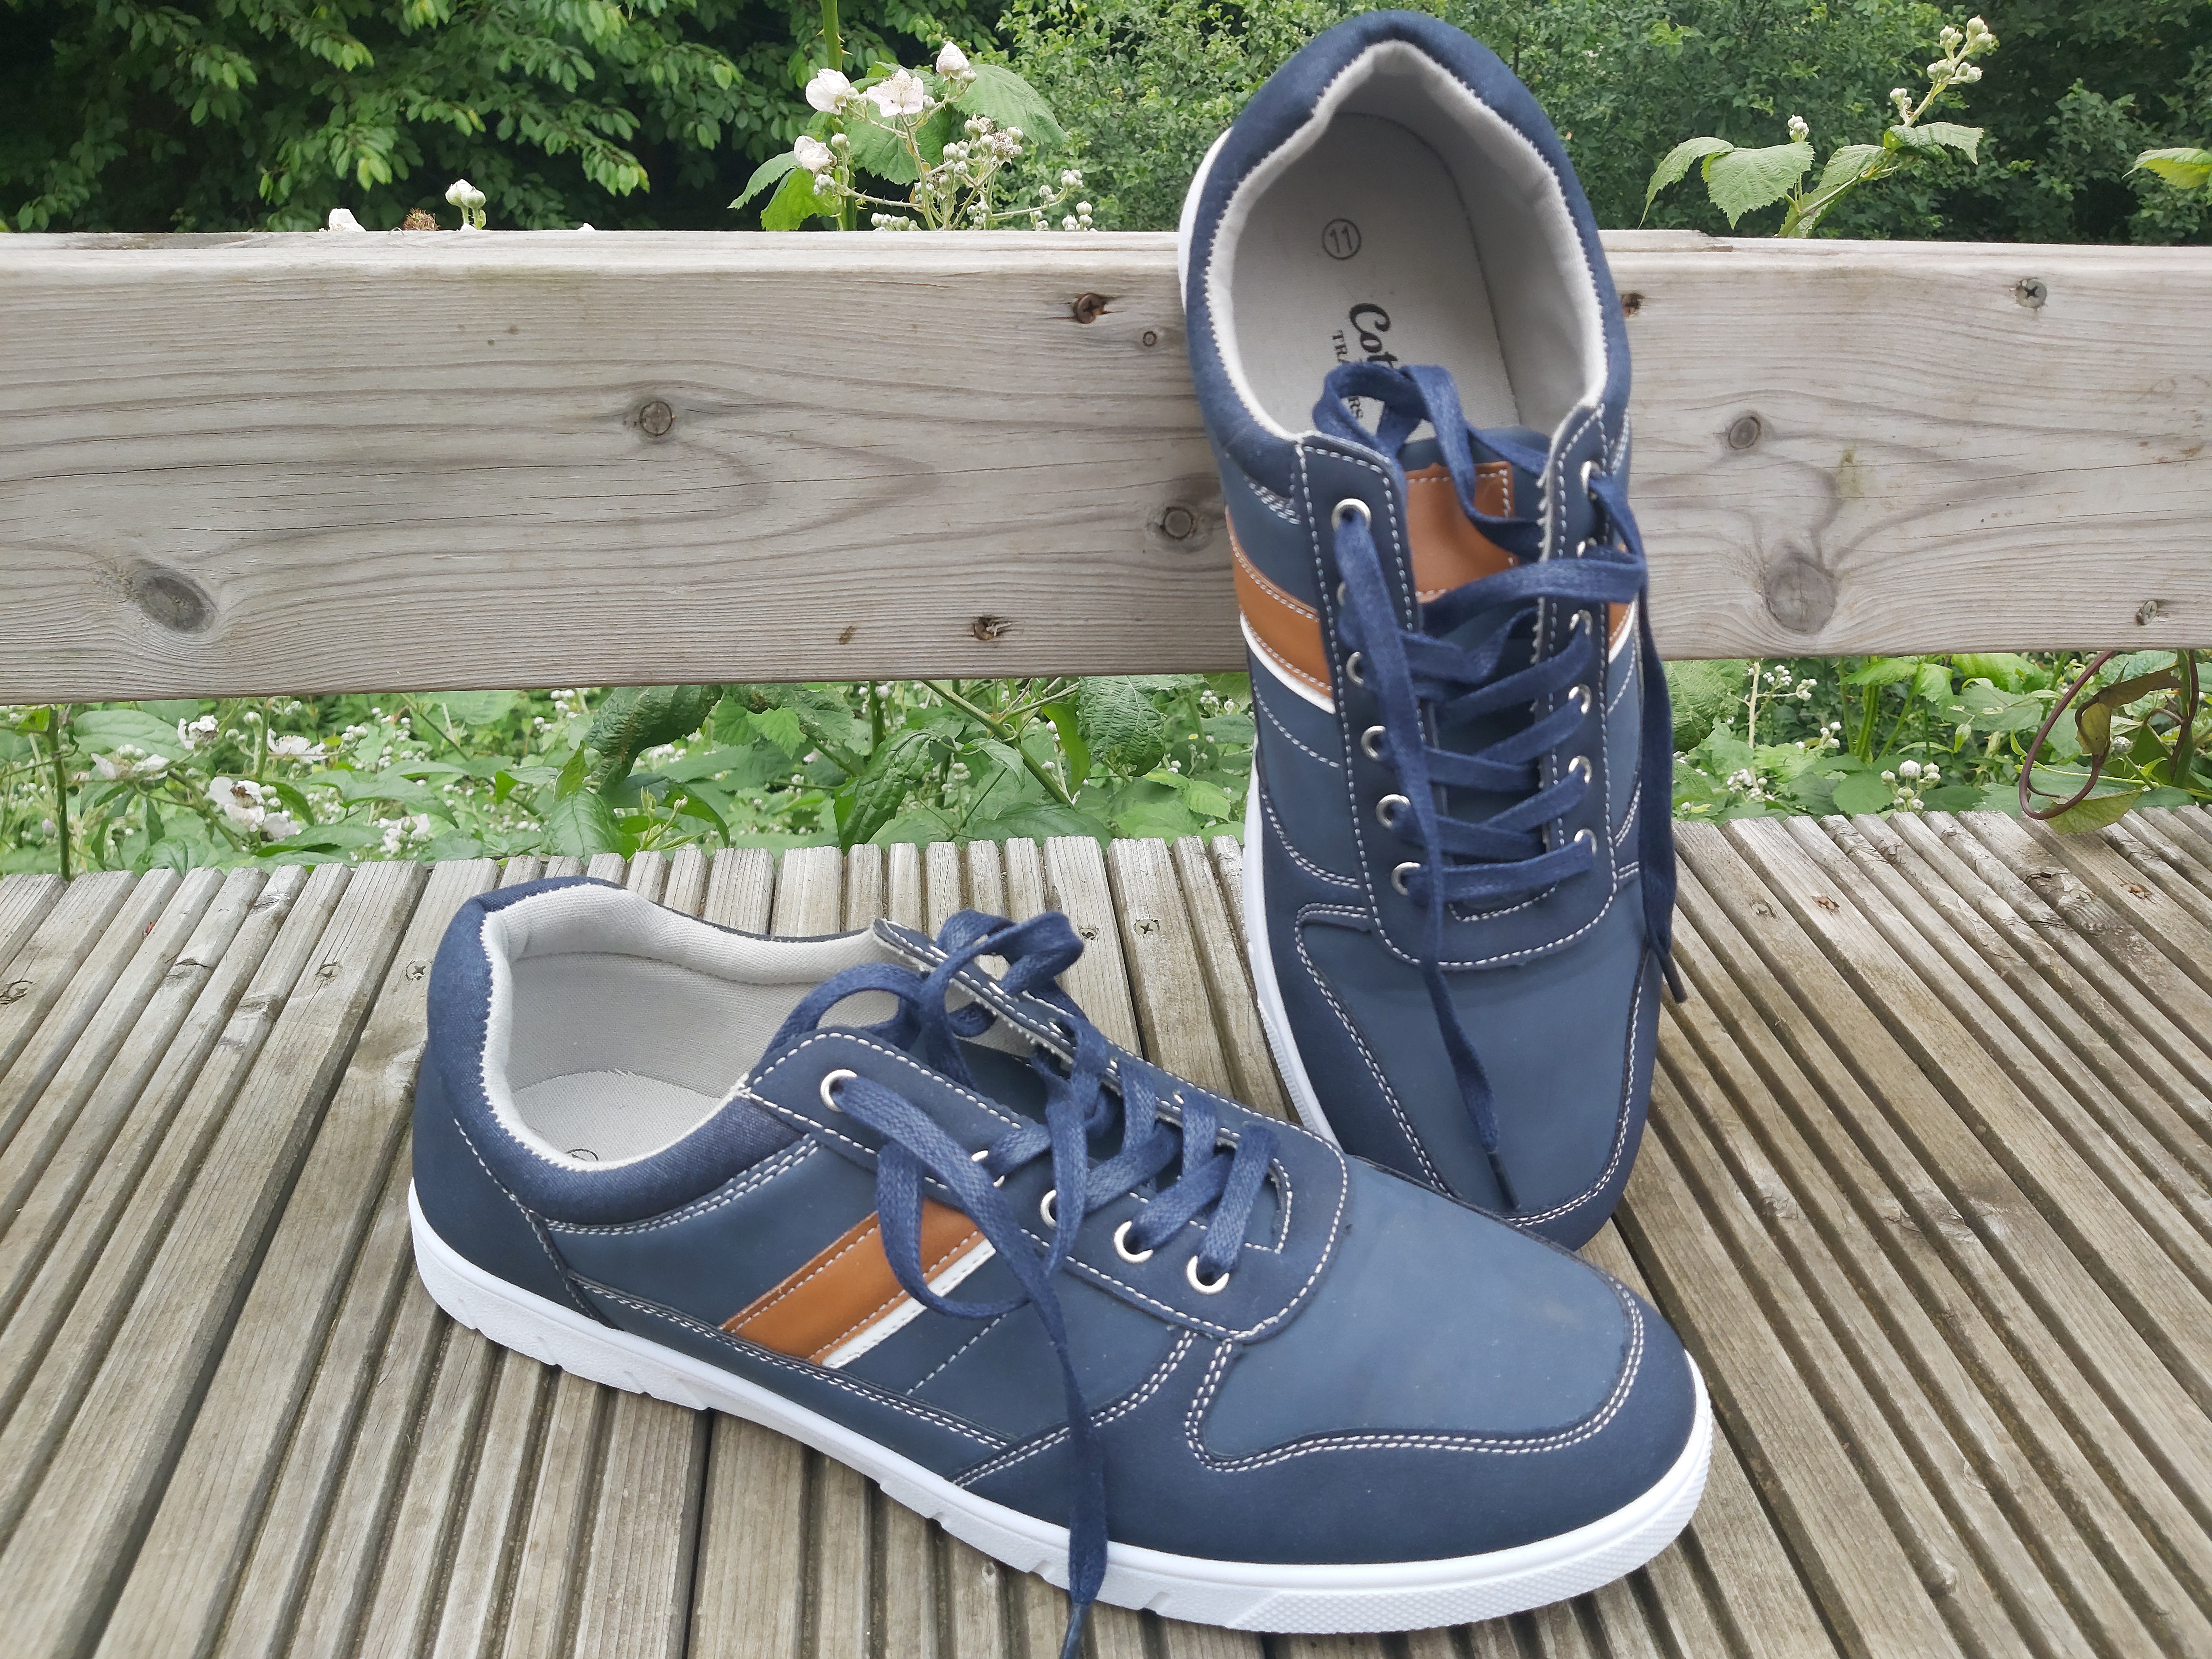 Casual lace up trainers in blue and orange with white stripe and blue laces displayed on wooden background with greenery behind.  